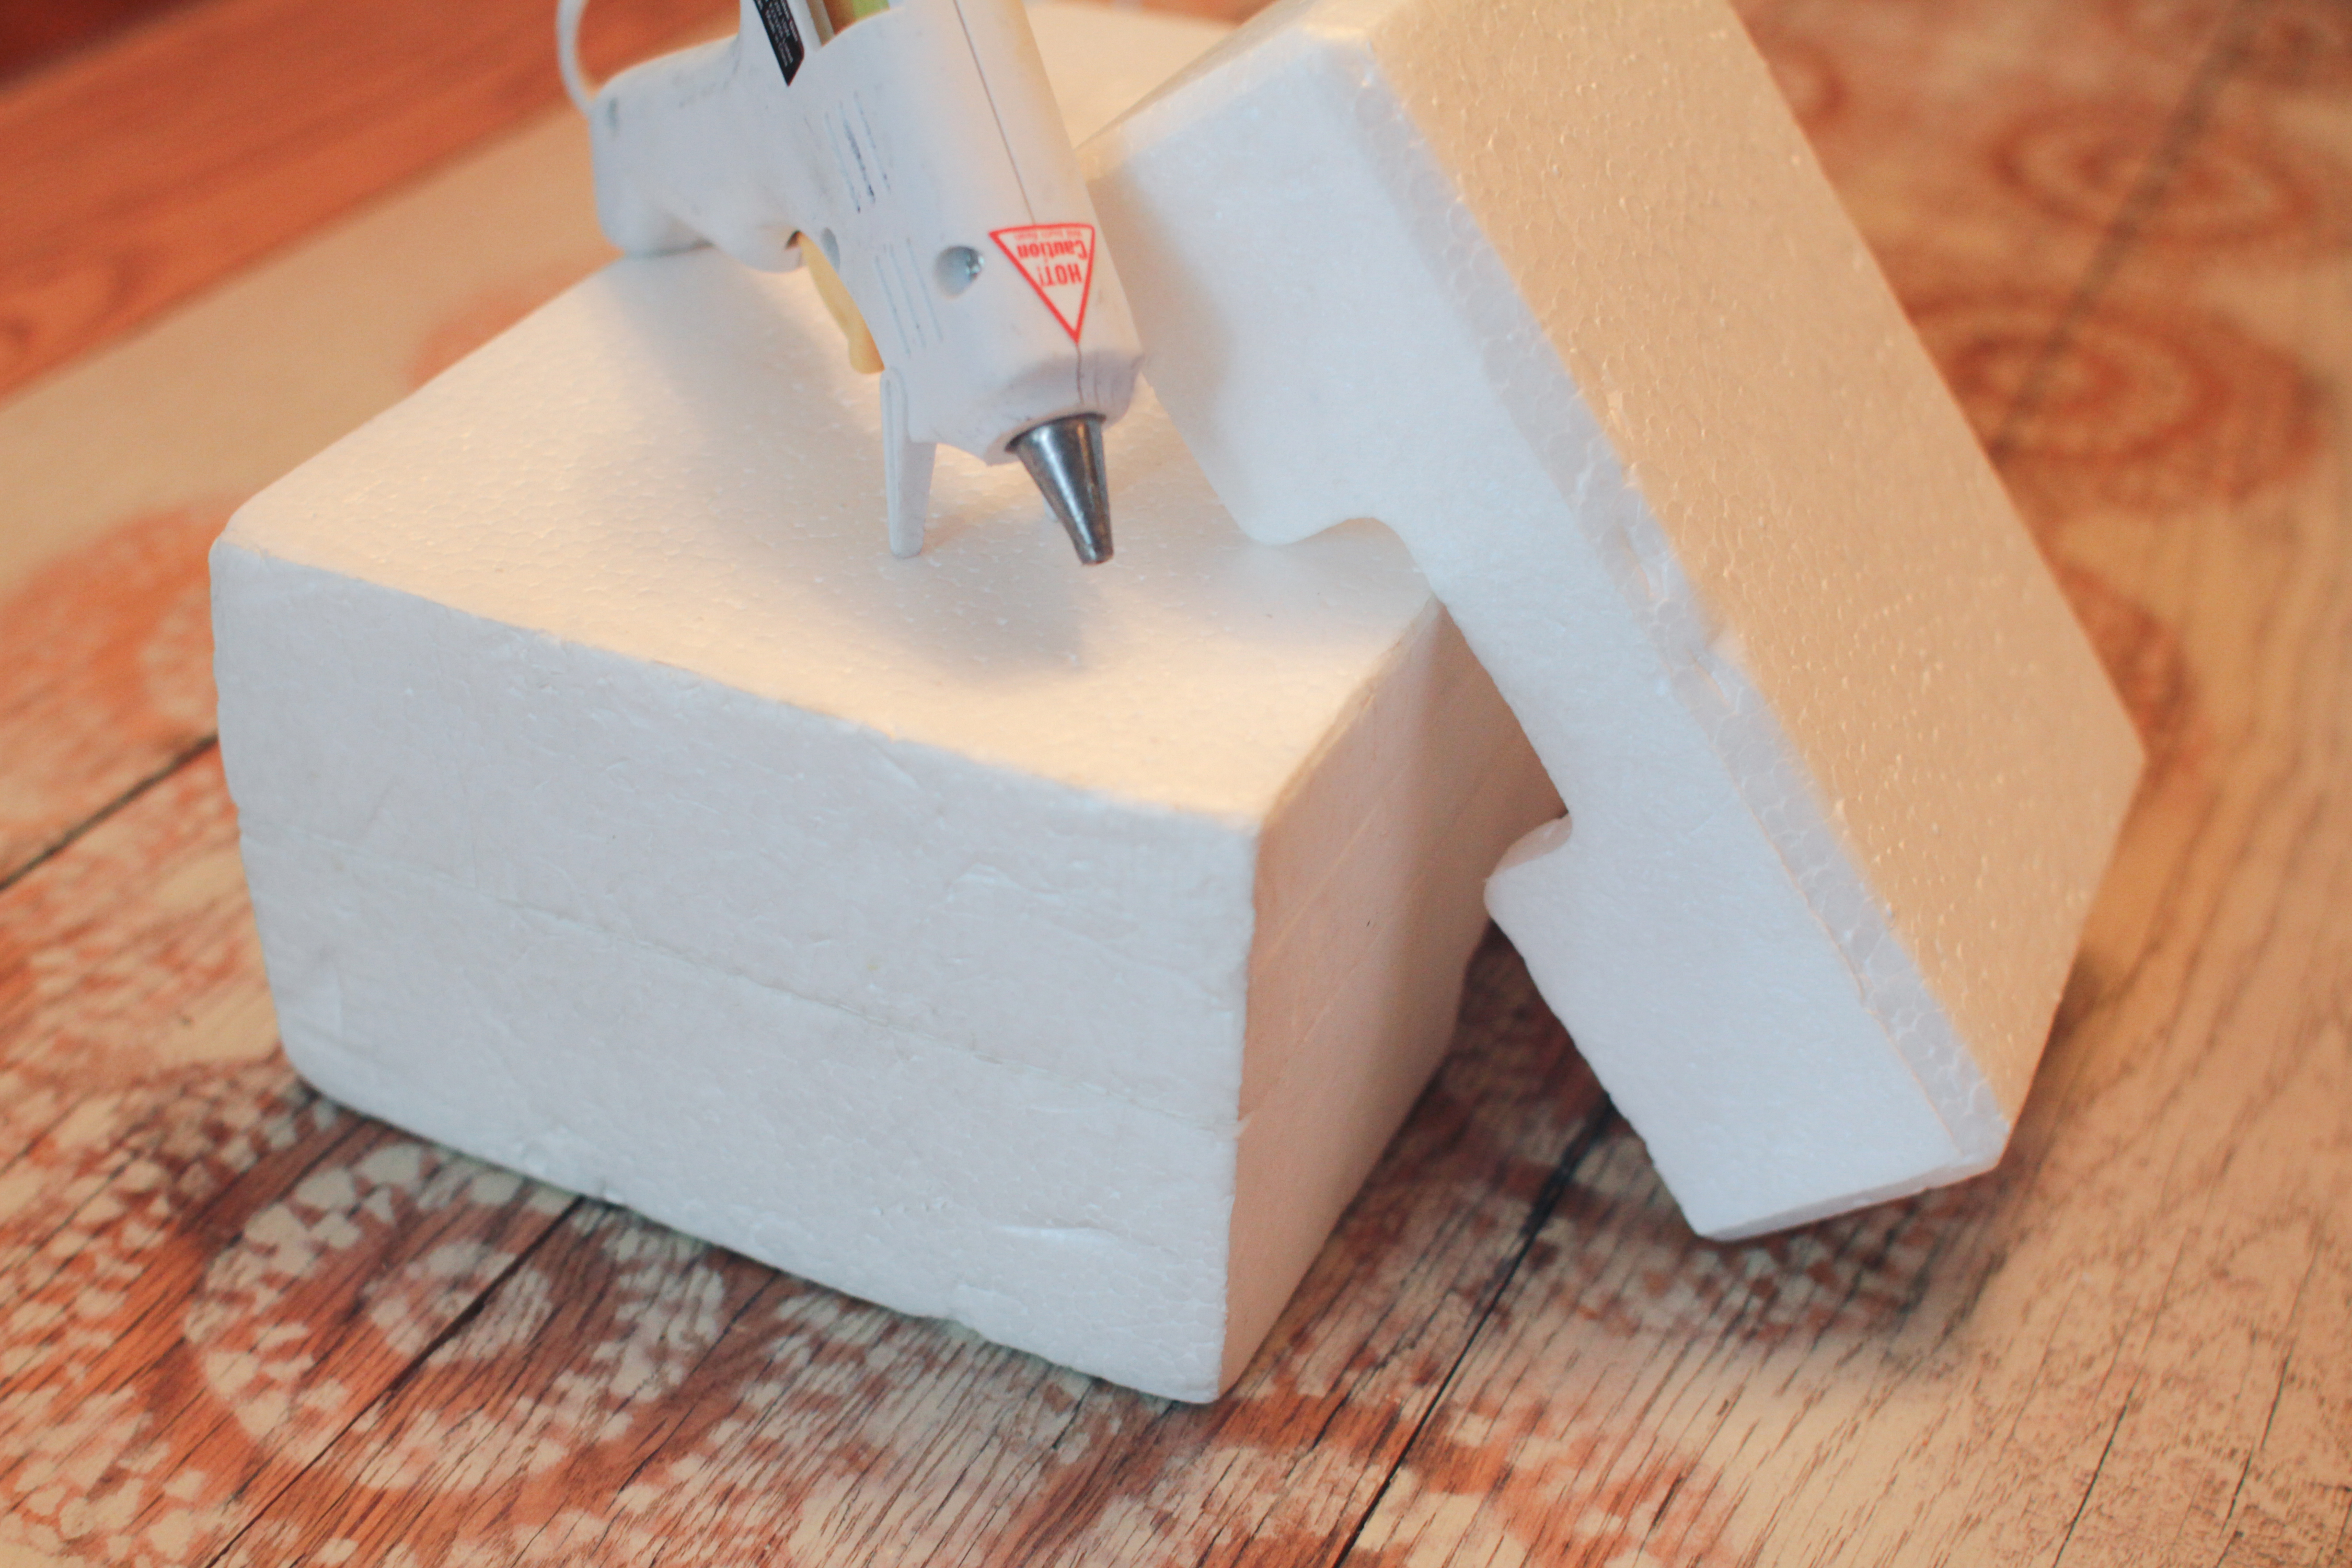 Styrofoam glue is the perfect glue for styrofoam products